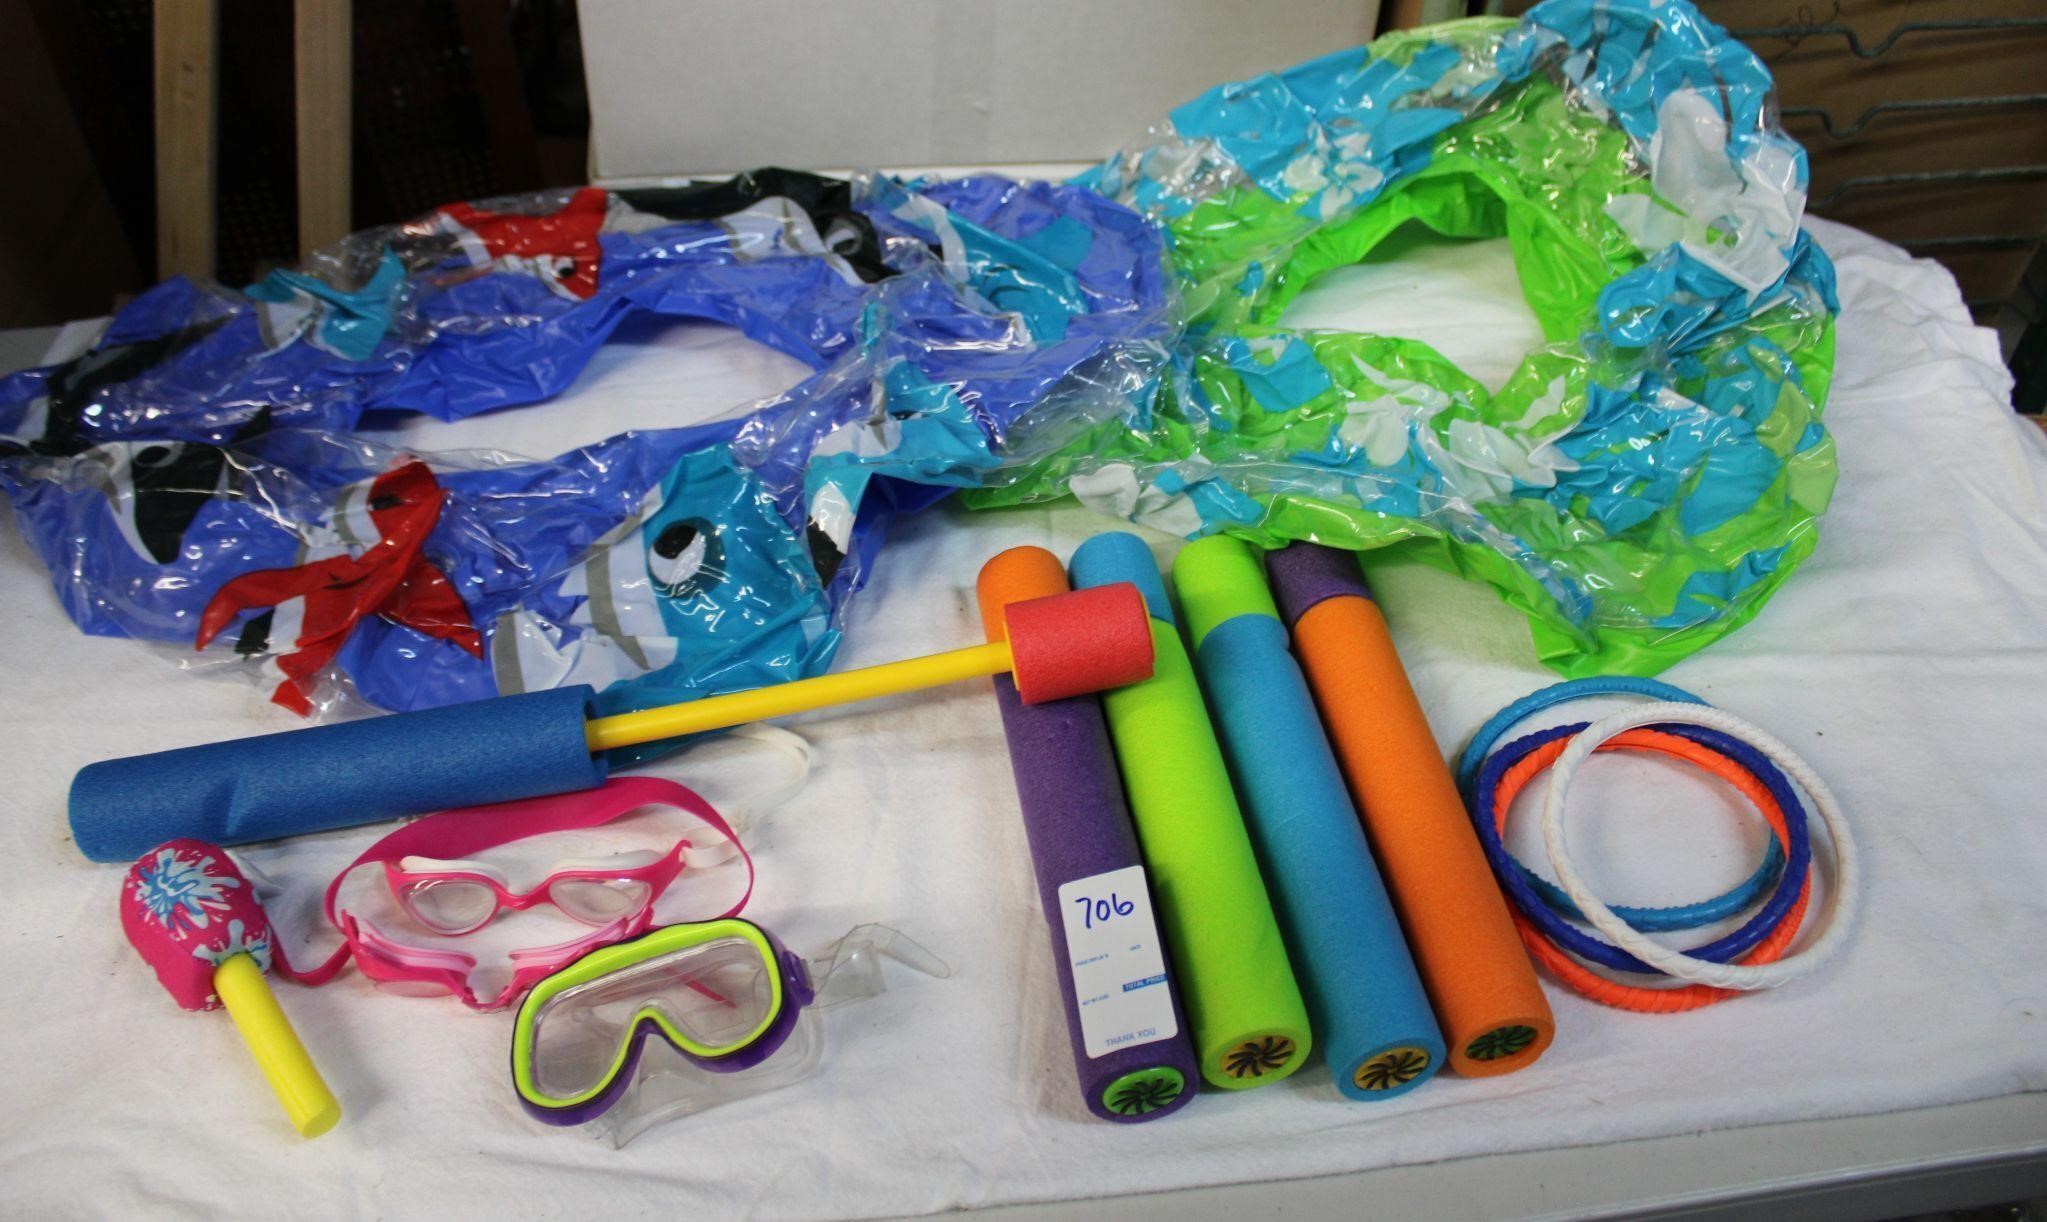 New Swimming Pool Accessories / Toys / Floats